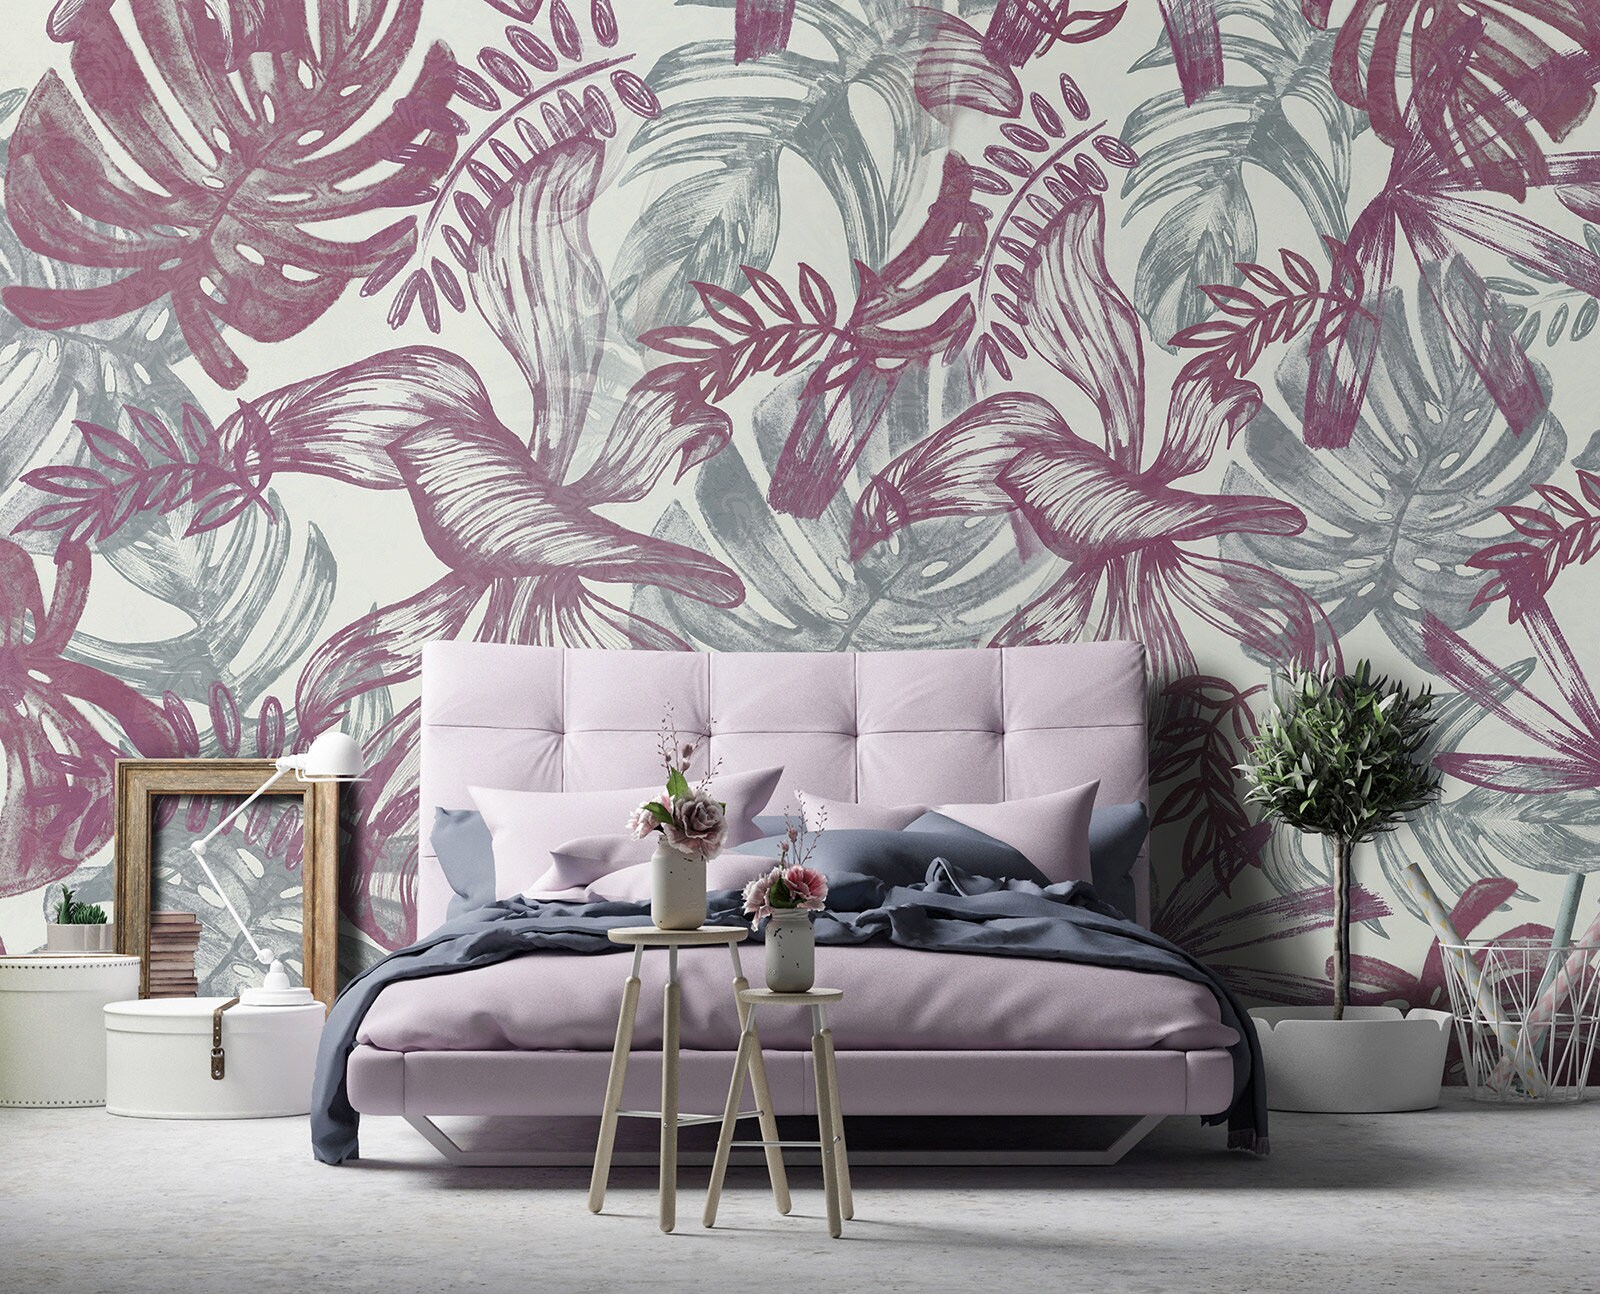 MAUVE Leaves Wallpaper Decal Mural Wall Decoration - Etsy